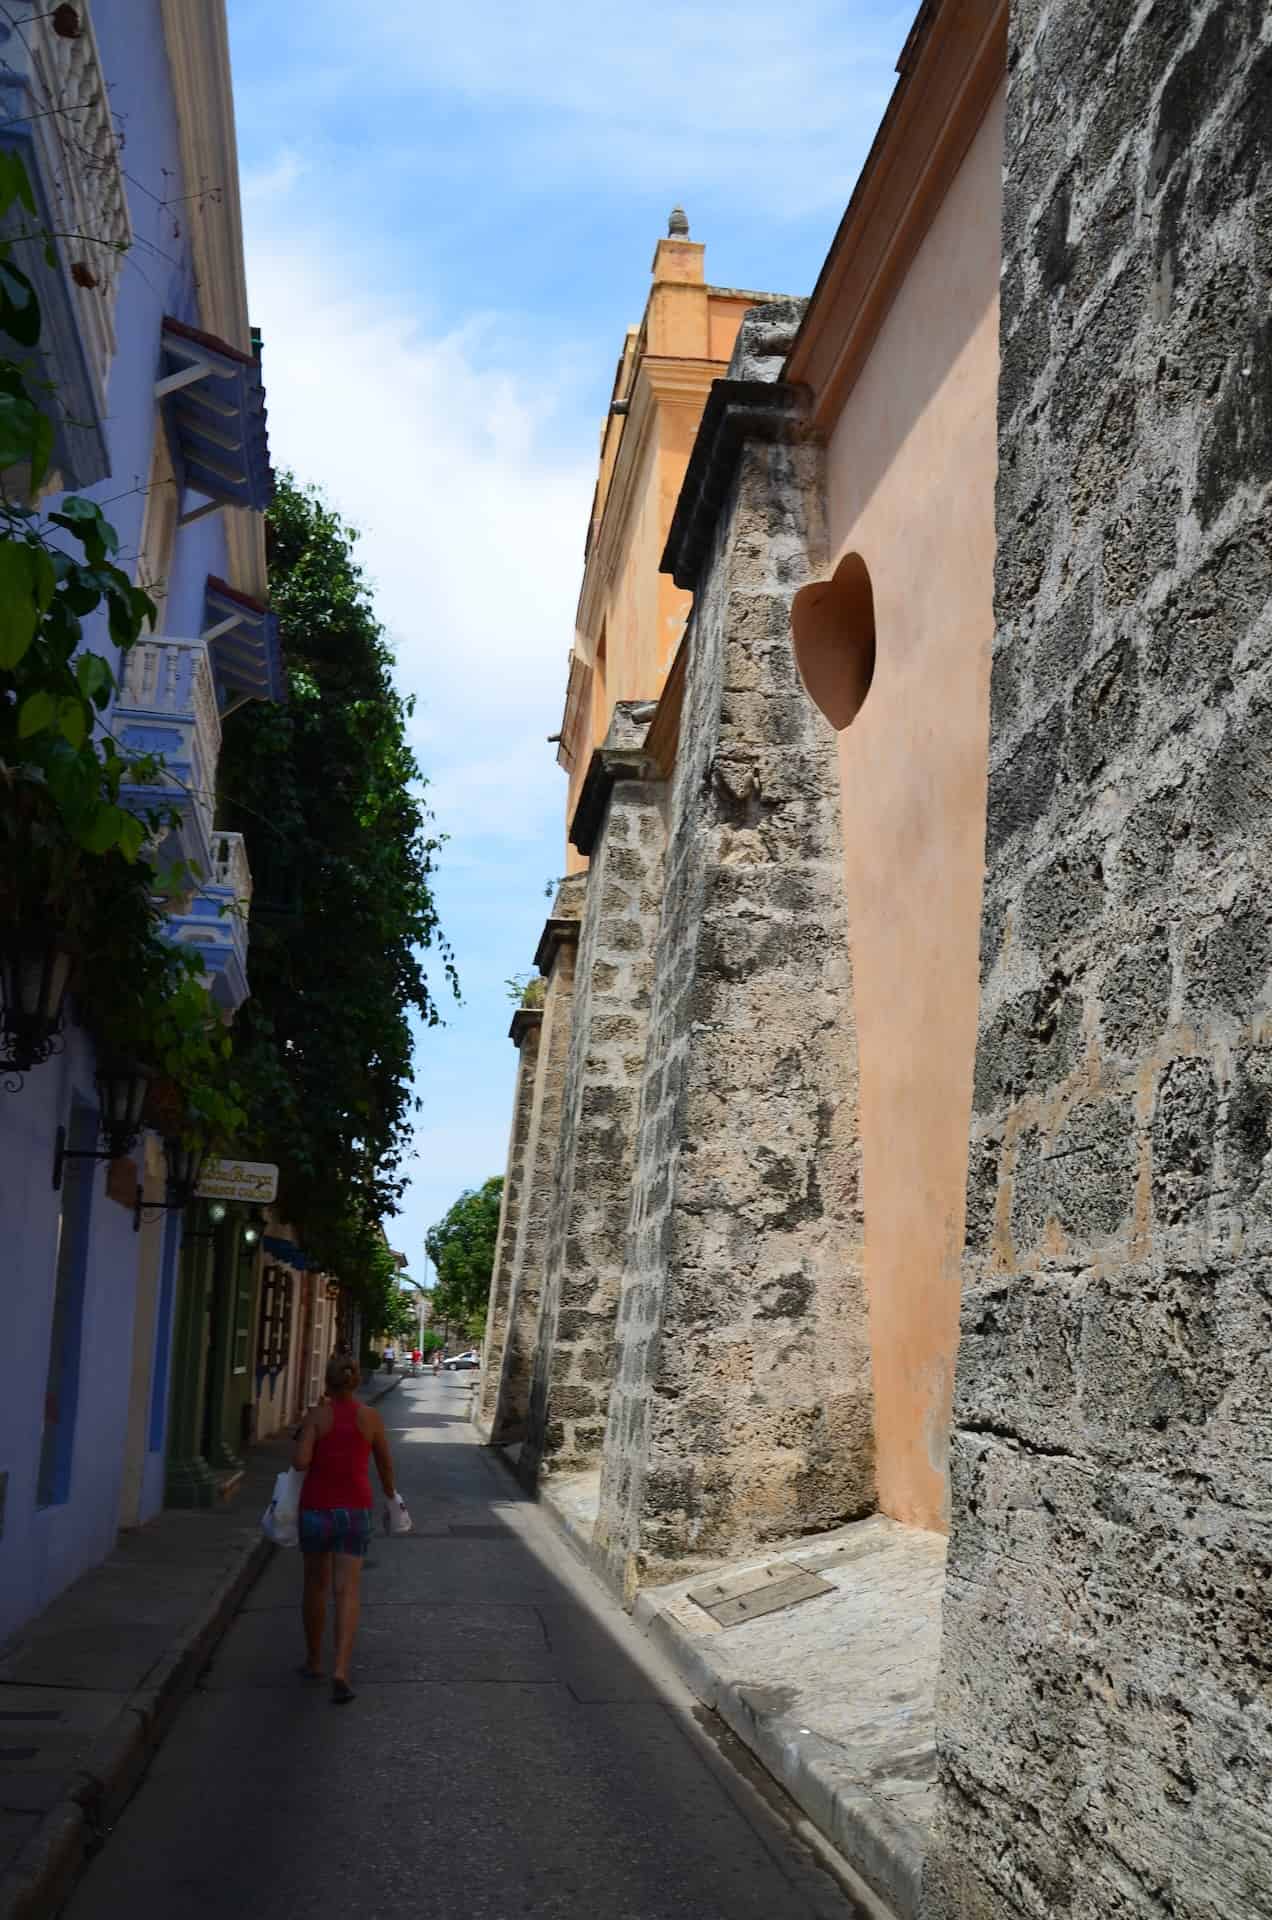 Buttresses of the Church of Santo Domingo in the Old Town of Cartagena, Colombia